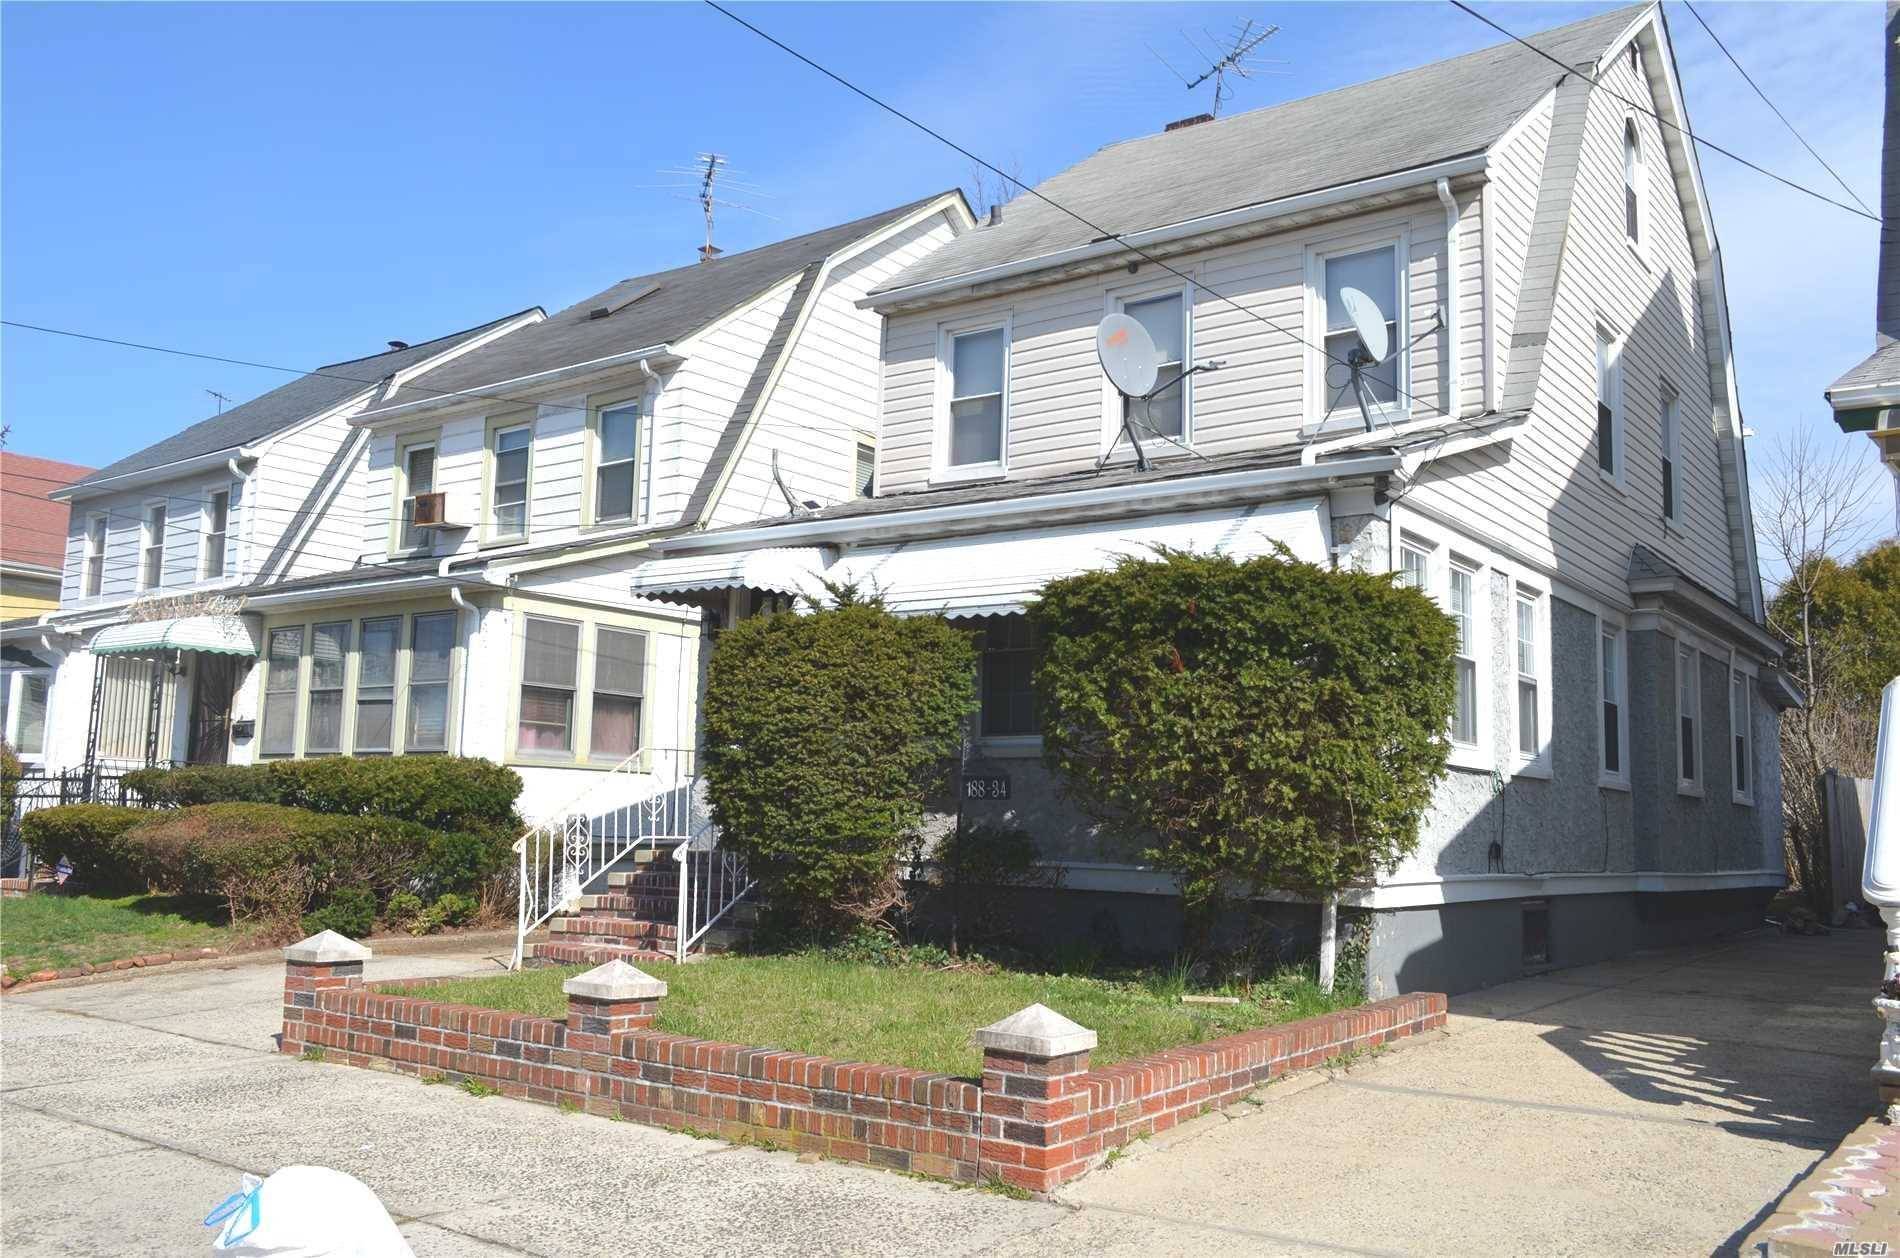 Keeseville 4 BR Multi-Family Jamaica LIC / Queens